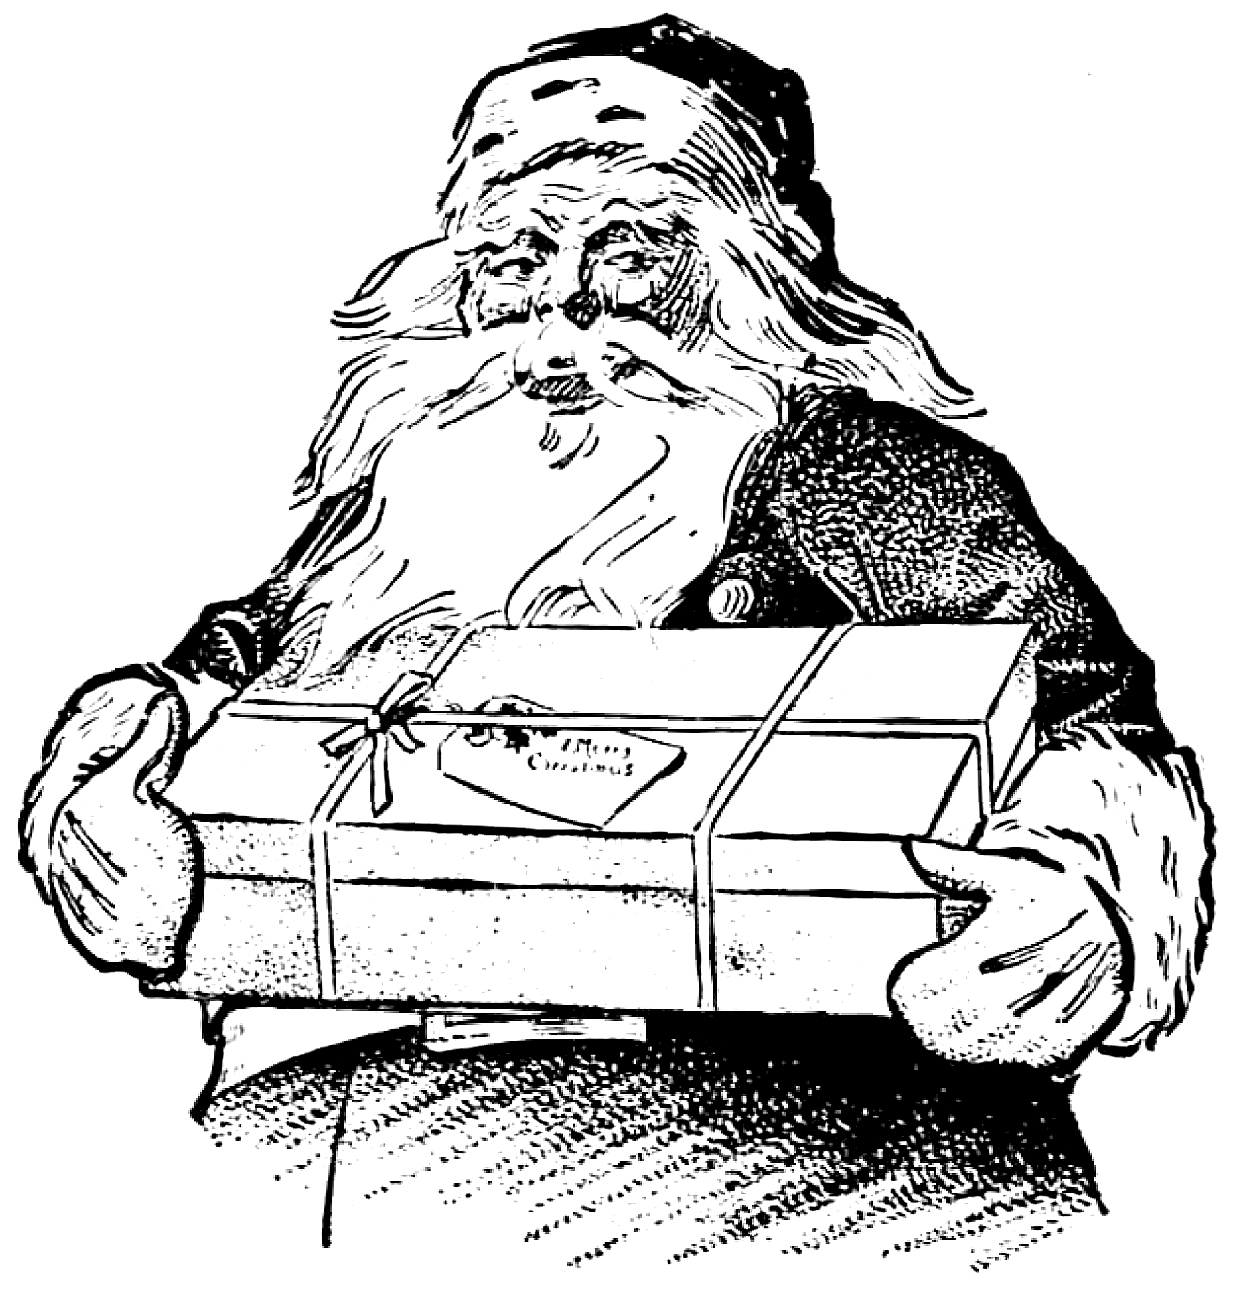 Vintage Christmas Clip Art - Santa with Gift - The Graphics Fairy